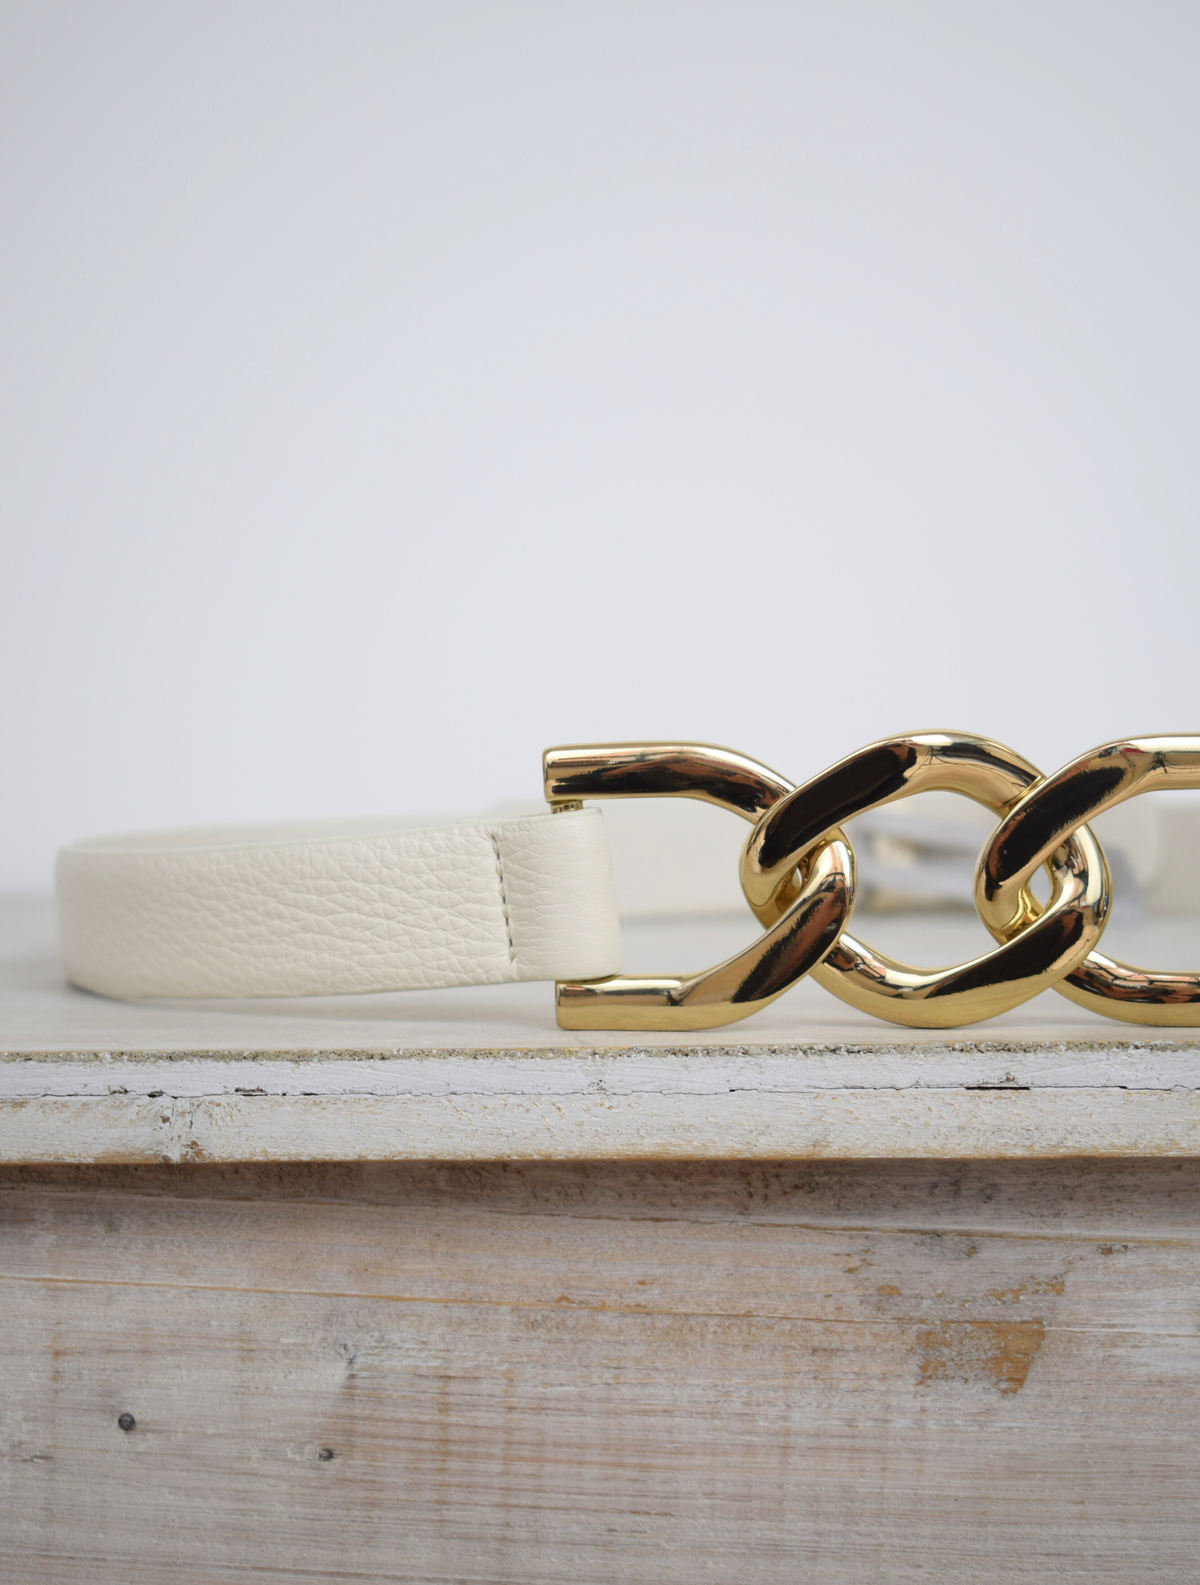 Ivory leather belt with gold metallic link feature at the front and press stud fastening at the back